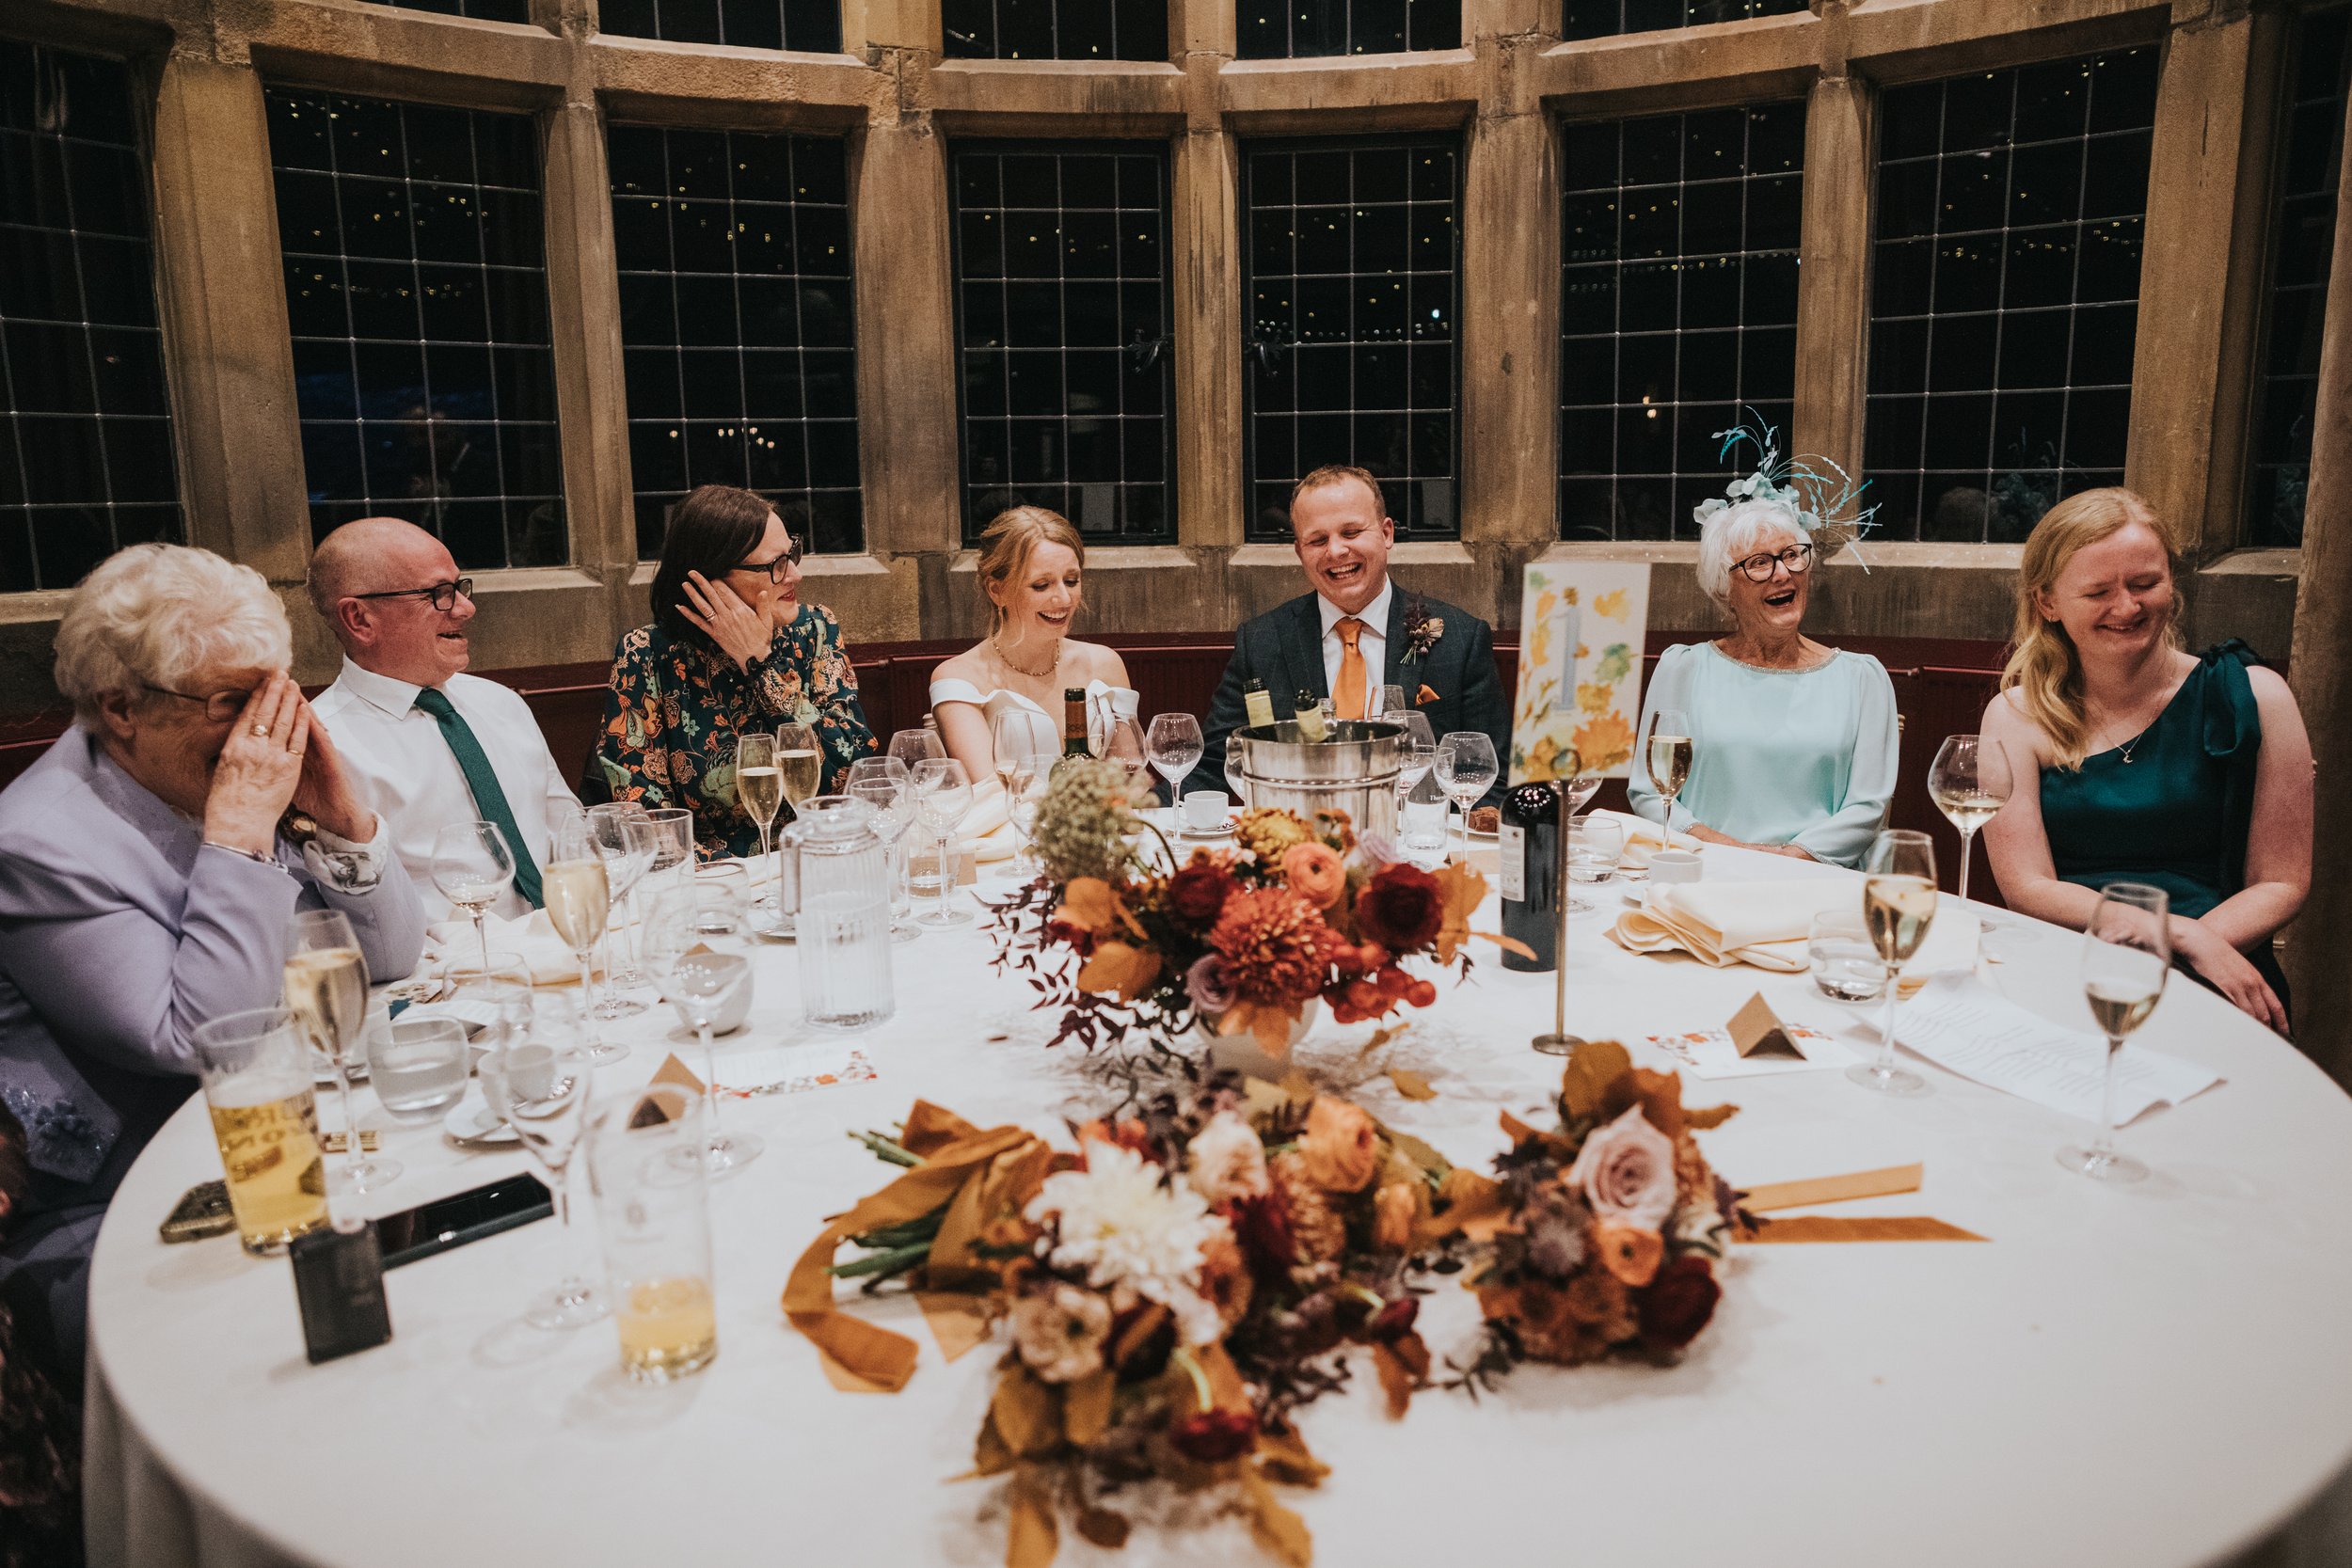 Head table laughing together. 